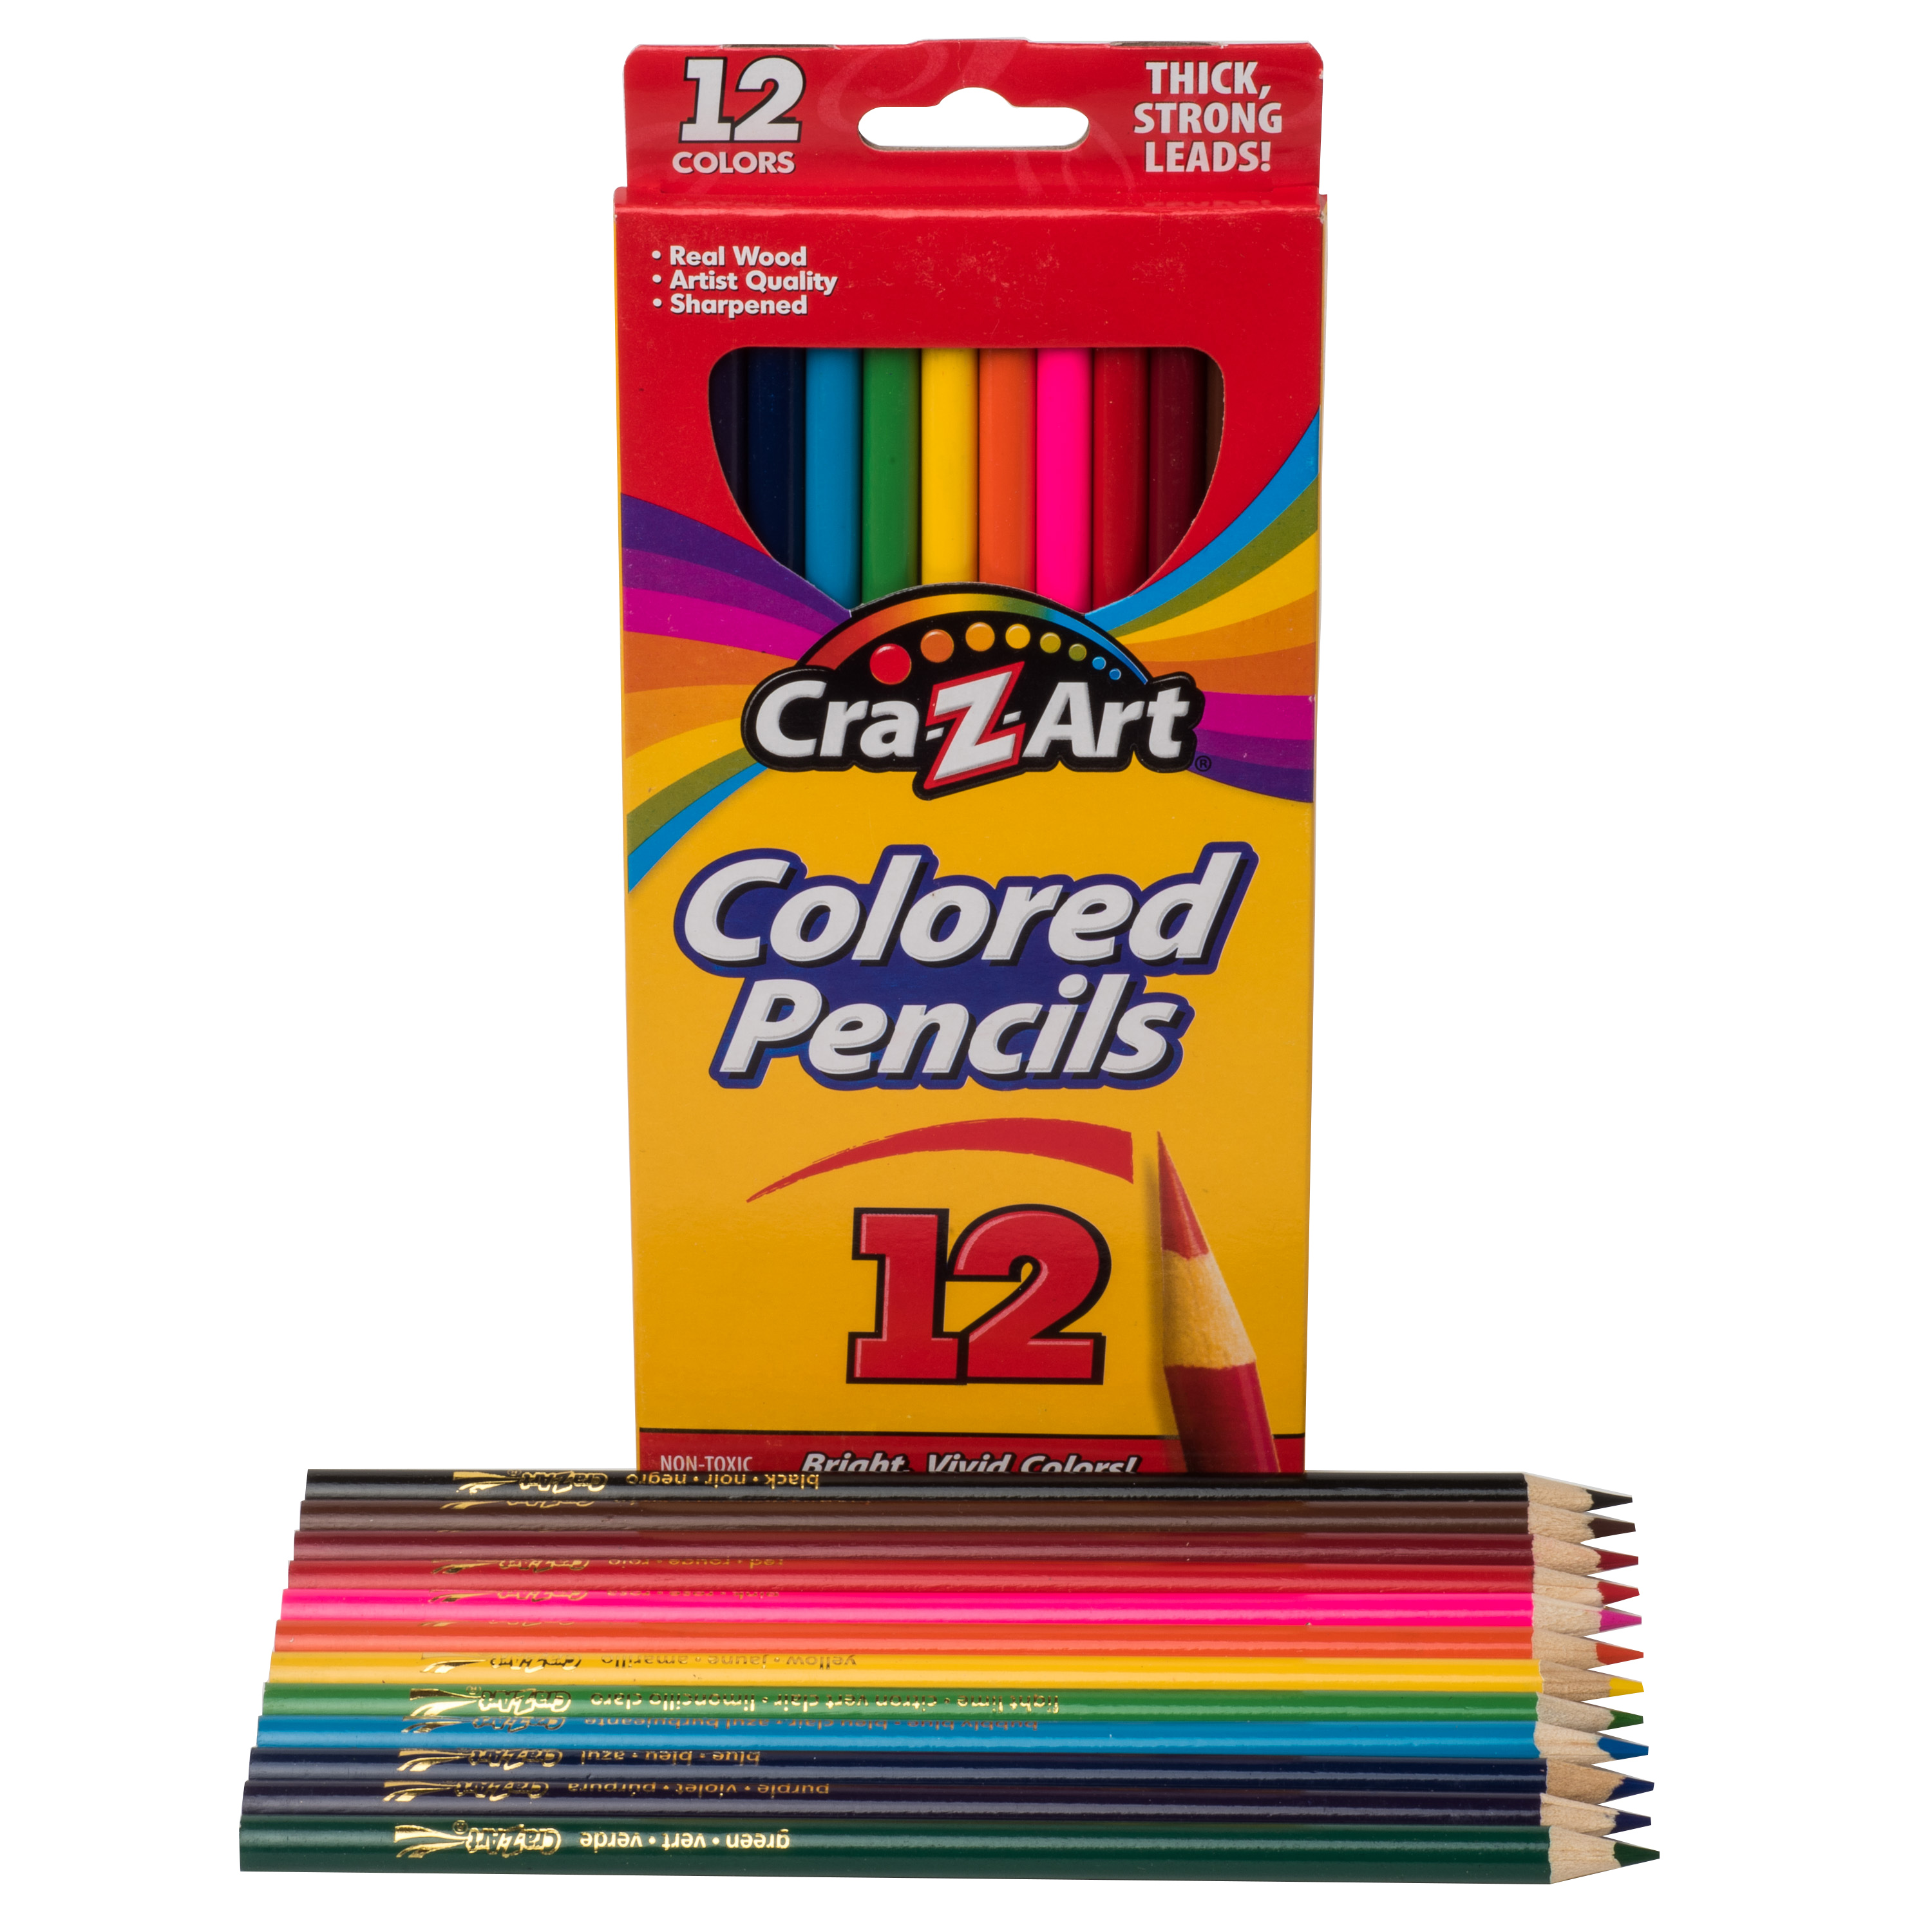 Cra-Z-Art Colored Pencils, 12 Count, Beginner Child to Adult, Back to School Supplies - image 8 of 11